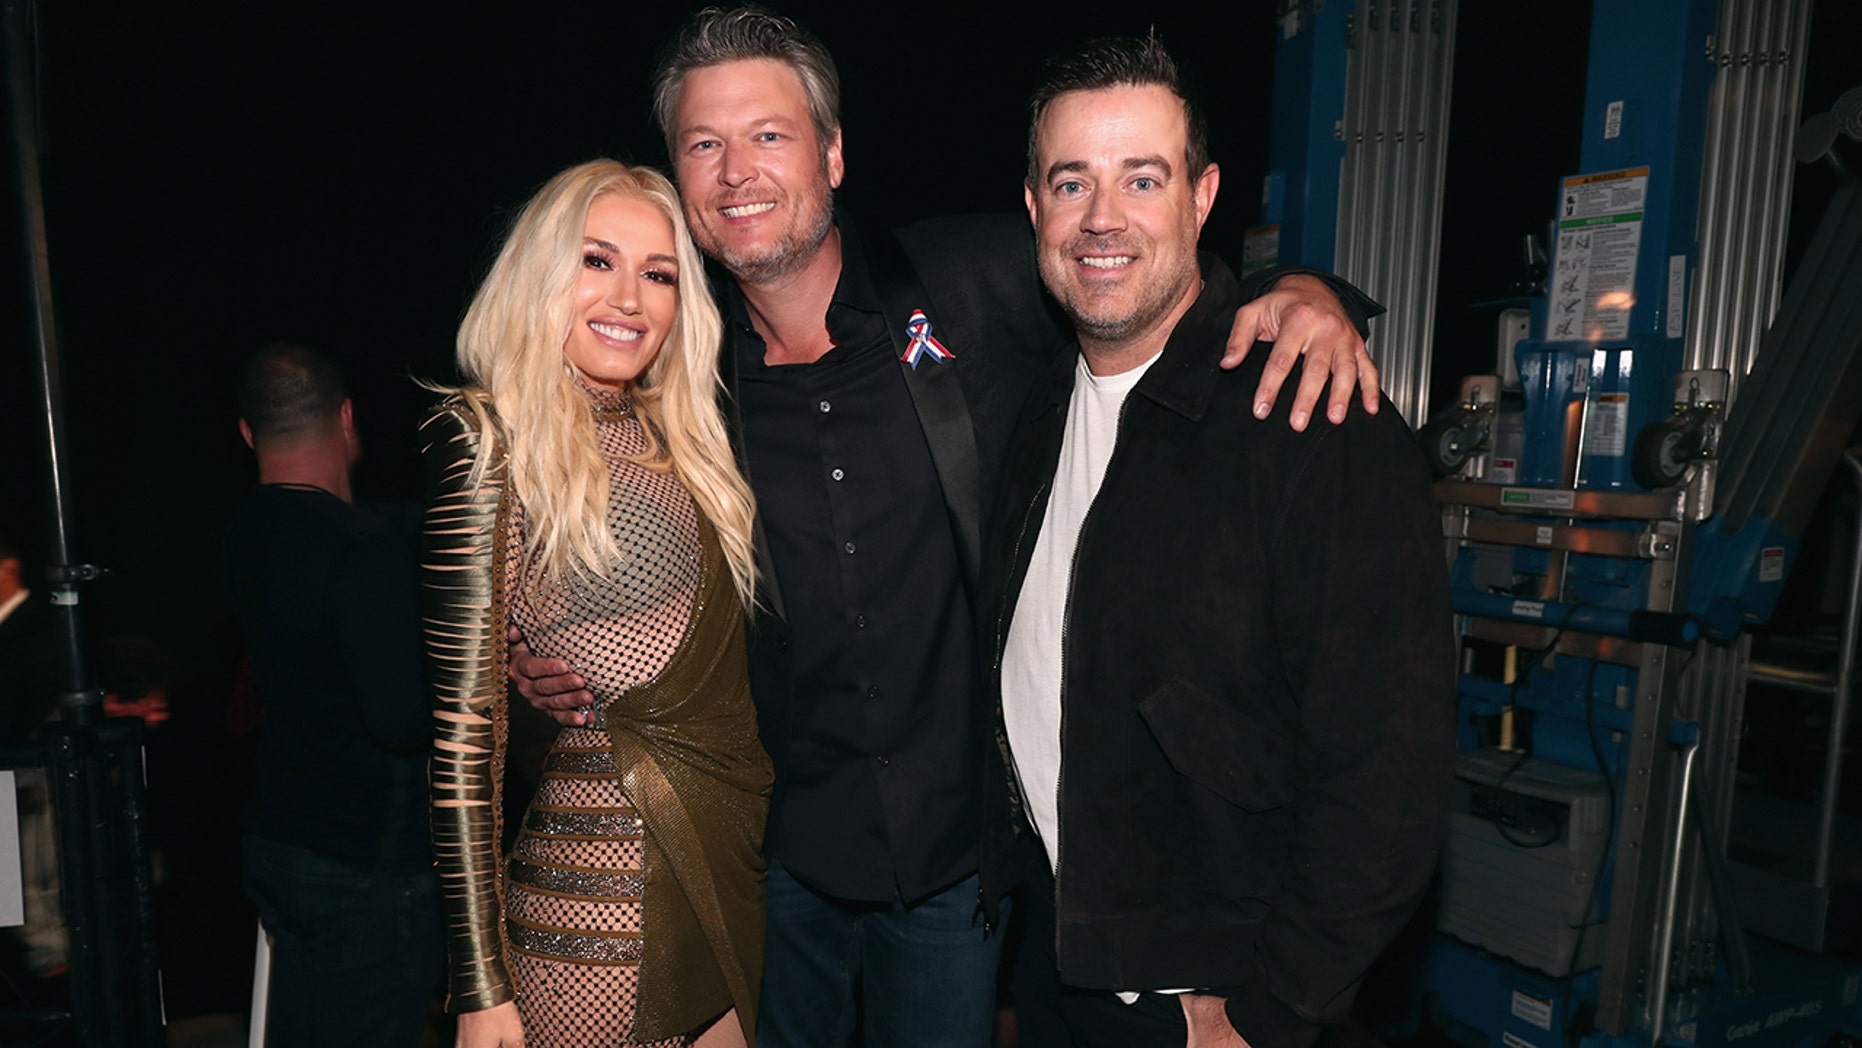 Pictured: Gwen Stefani and Blake Shelton, television personalities, and television personality Carson Daly at the 2018 E! The People's Choice Awards were held at Barker Hangar on November 11, 2018.